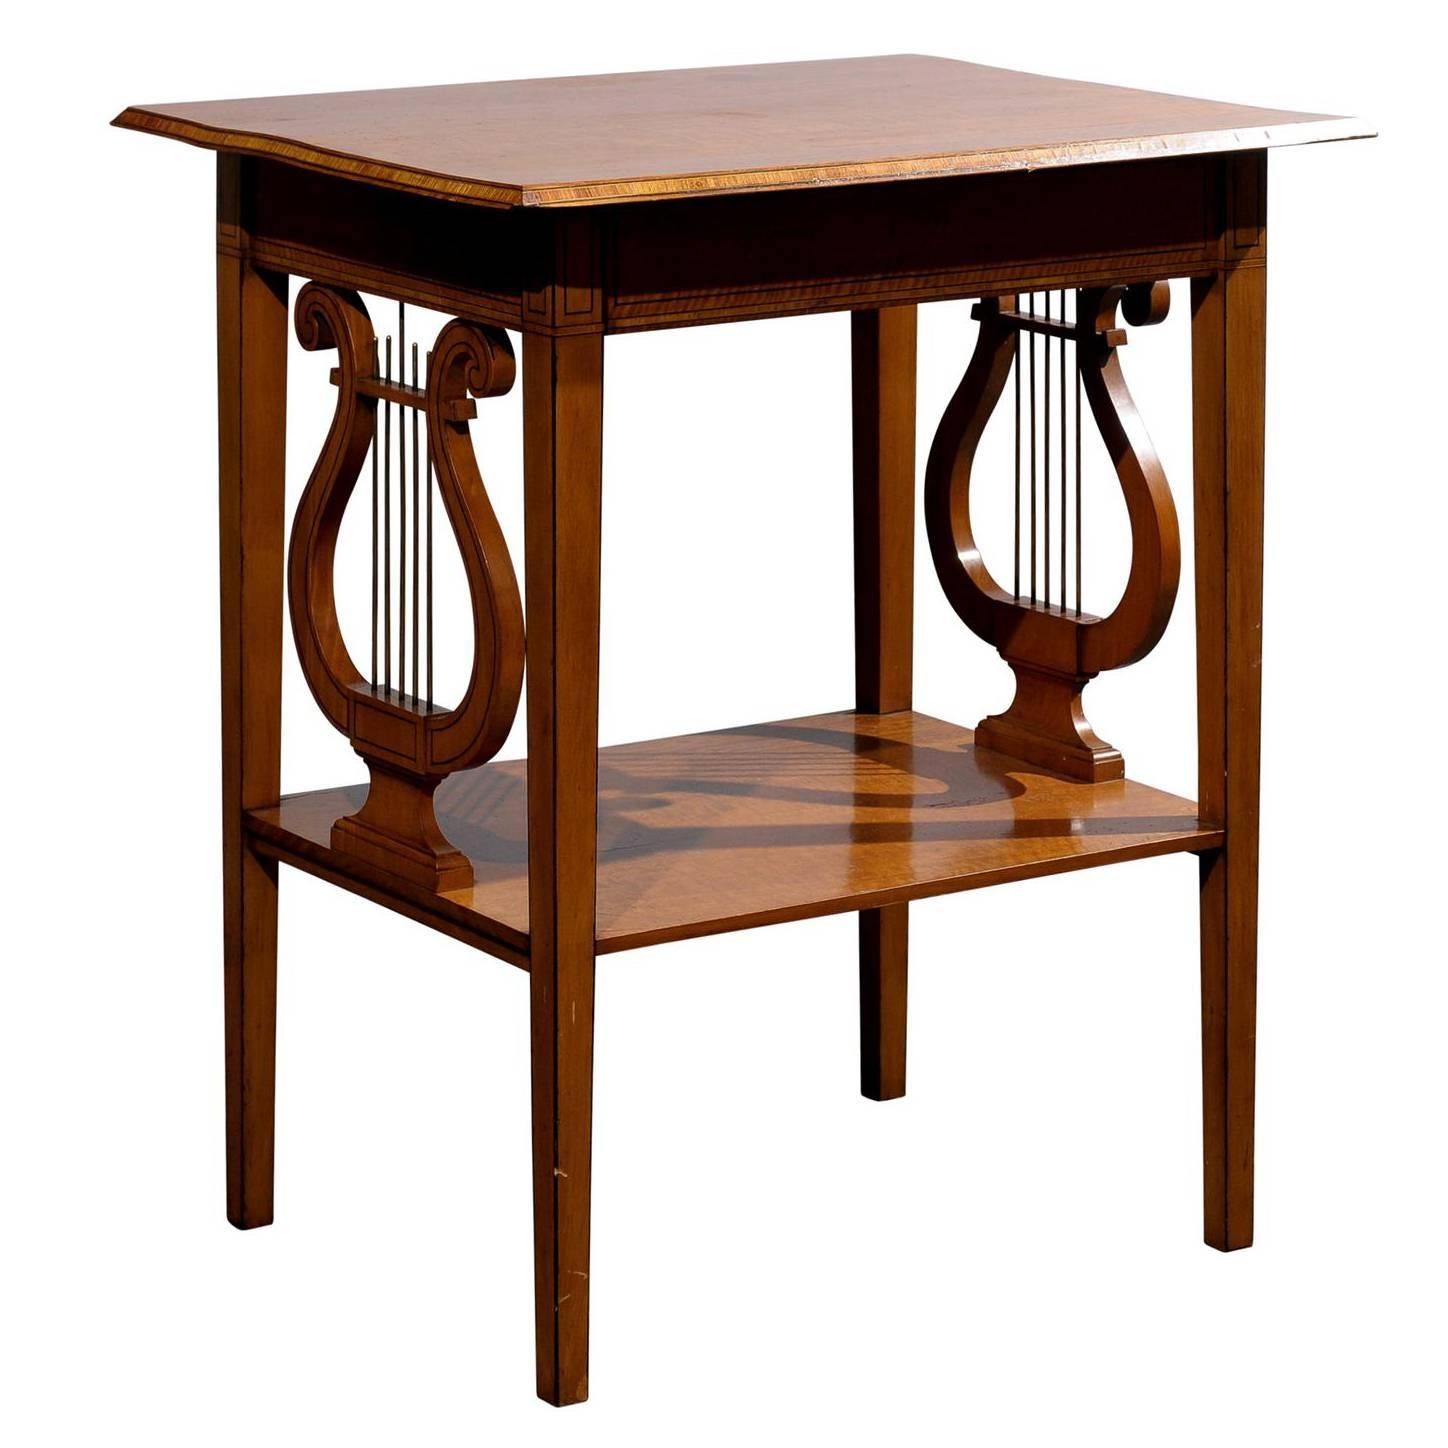 English 19th Century Collinson & Lock Satinwood Accent Table with Lyre Sides